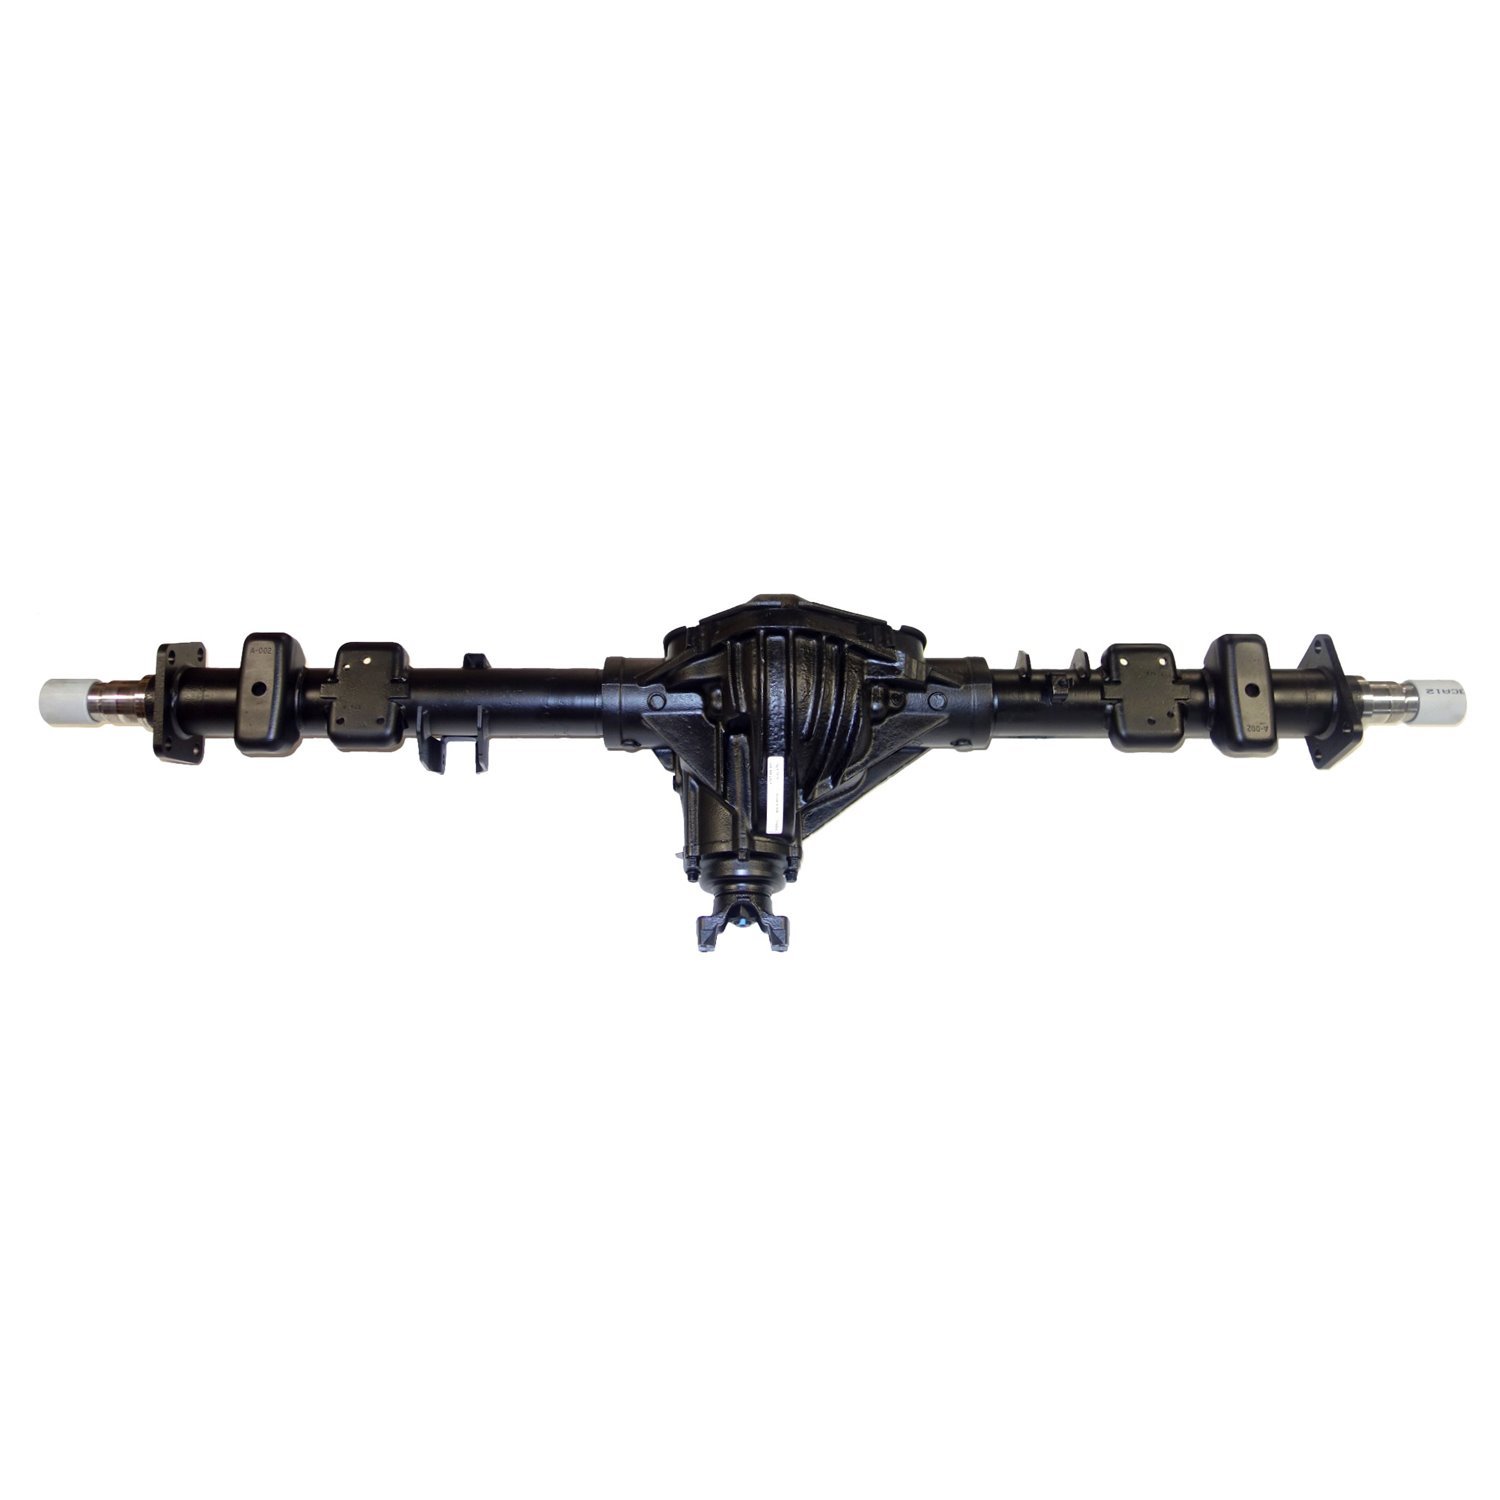 Remanufactured Axle Assy for GM 14 Bolt Truck 90-00 GM 2500 & 3500 Pickup 3.42 , 2wd, SRW